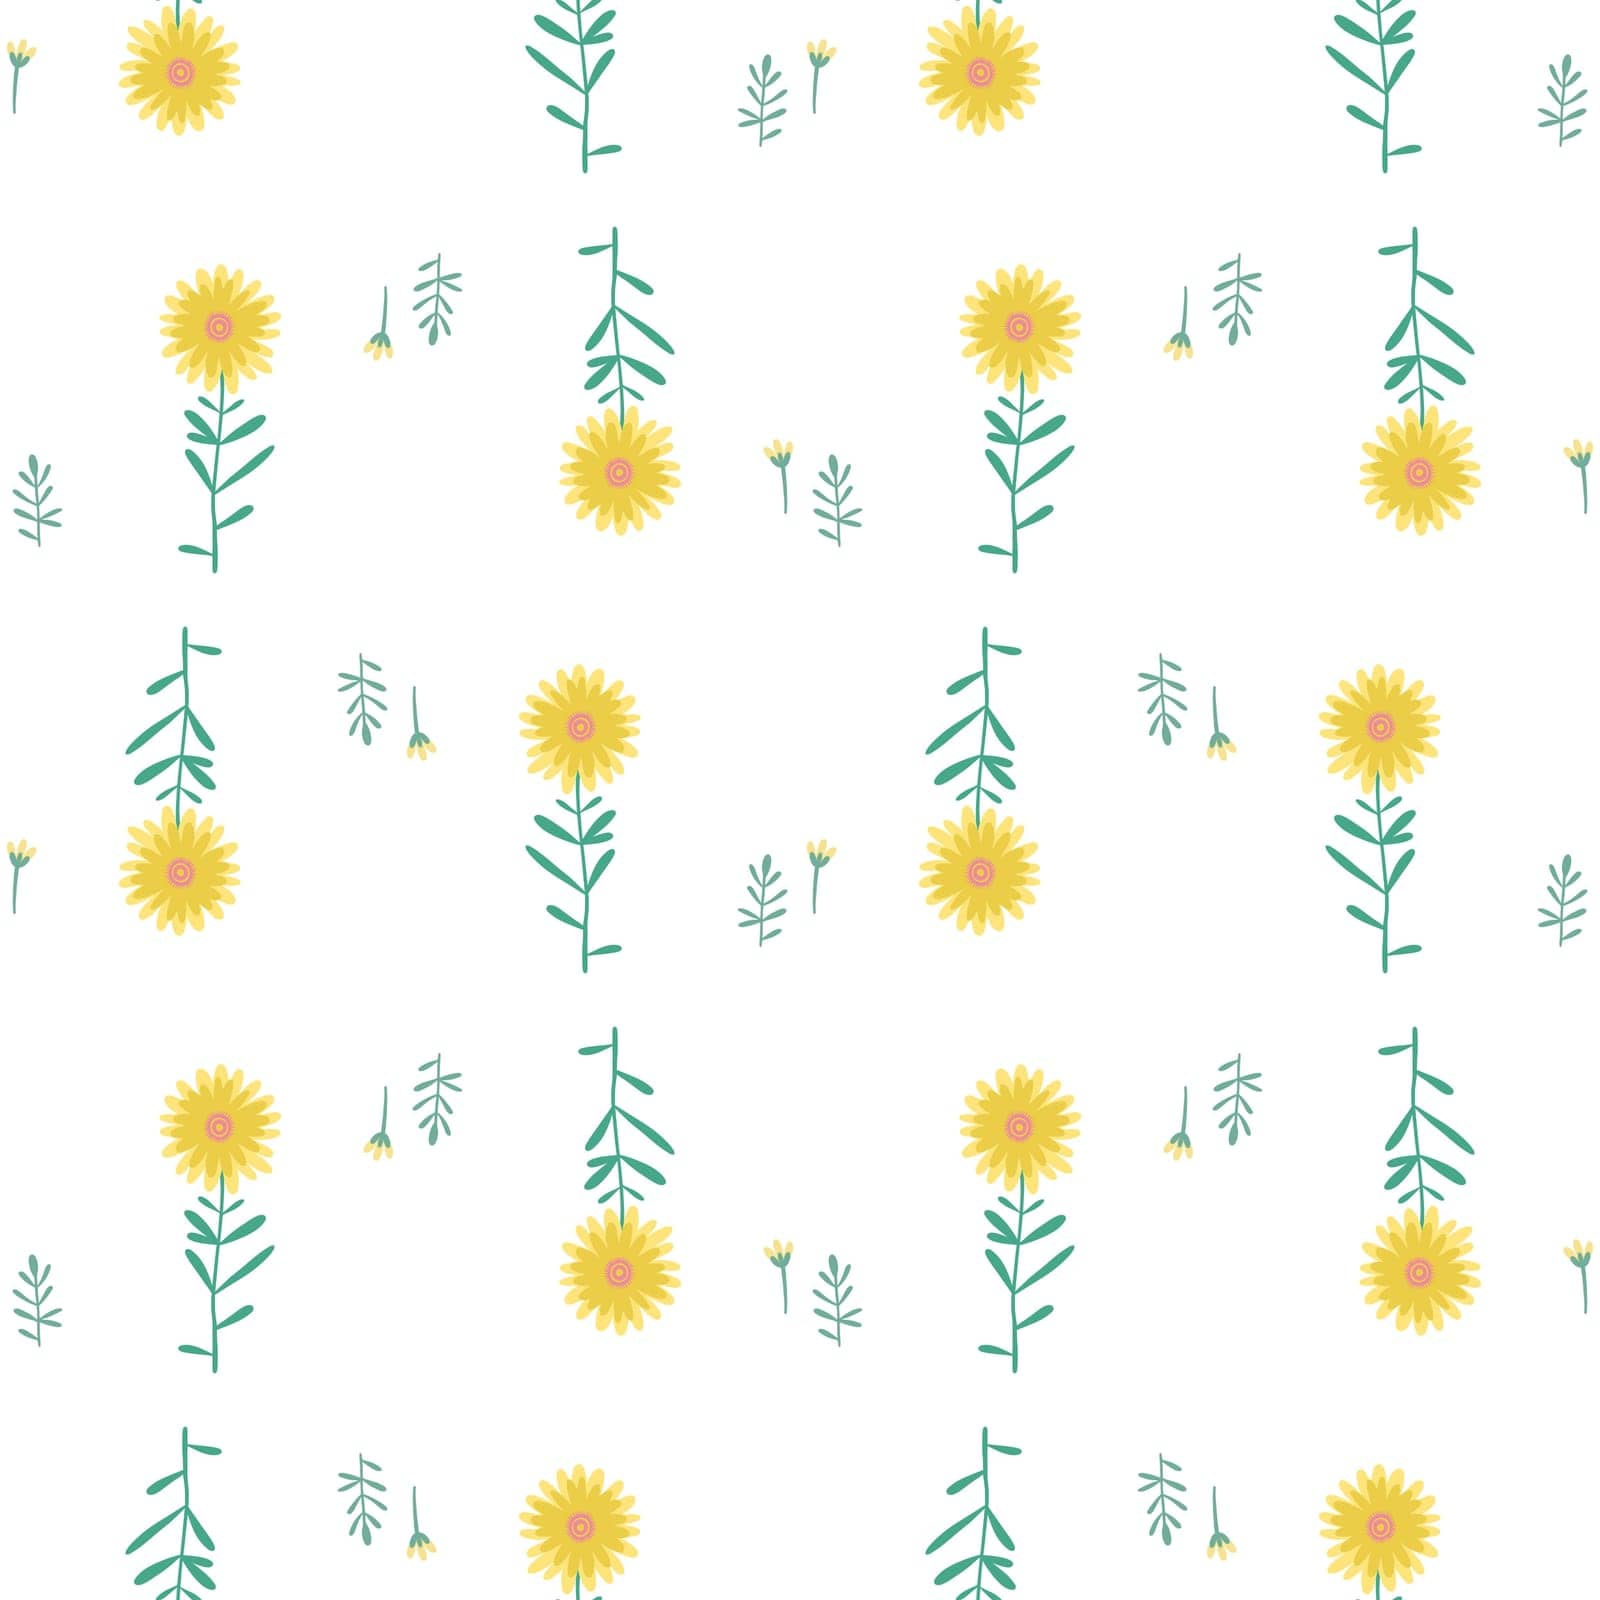 Floral Seamless Pattern of Sparse Yellow Flowers on White by LanaLeta